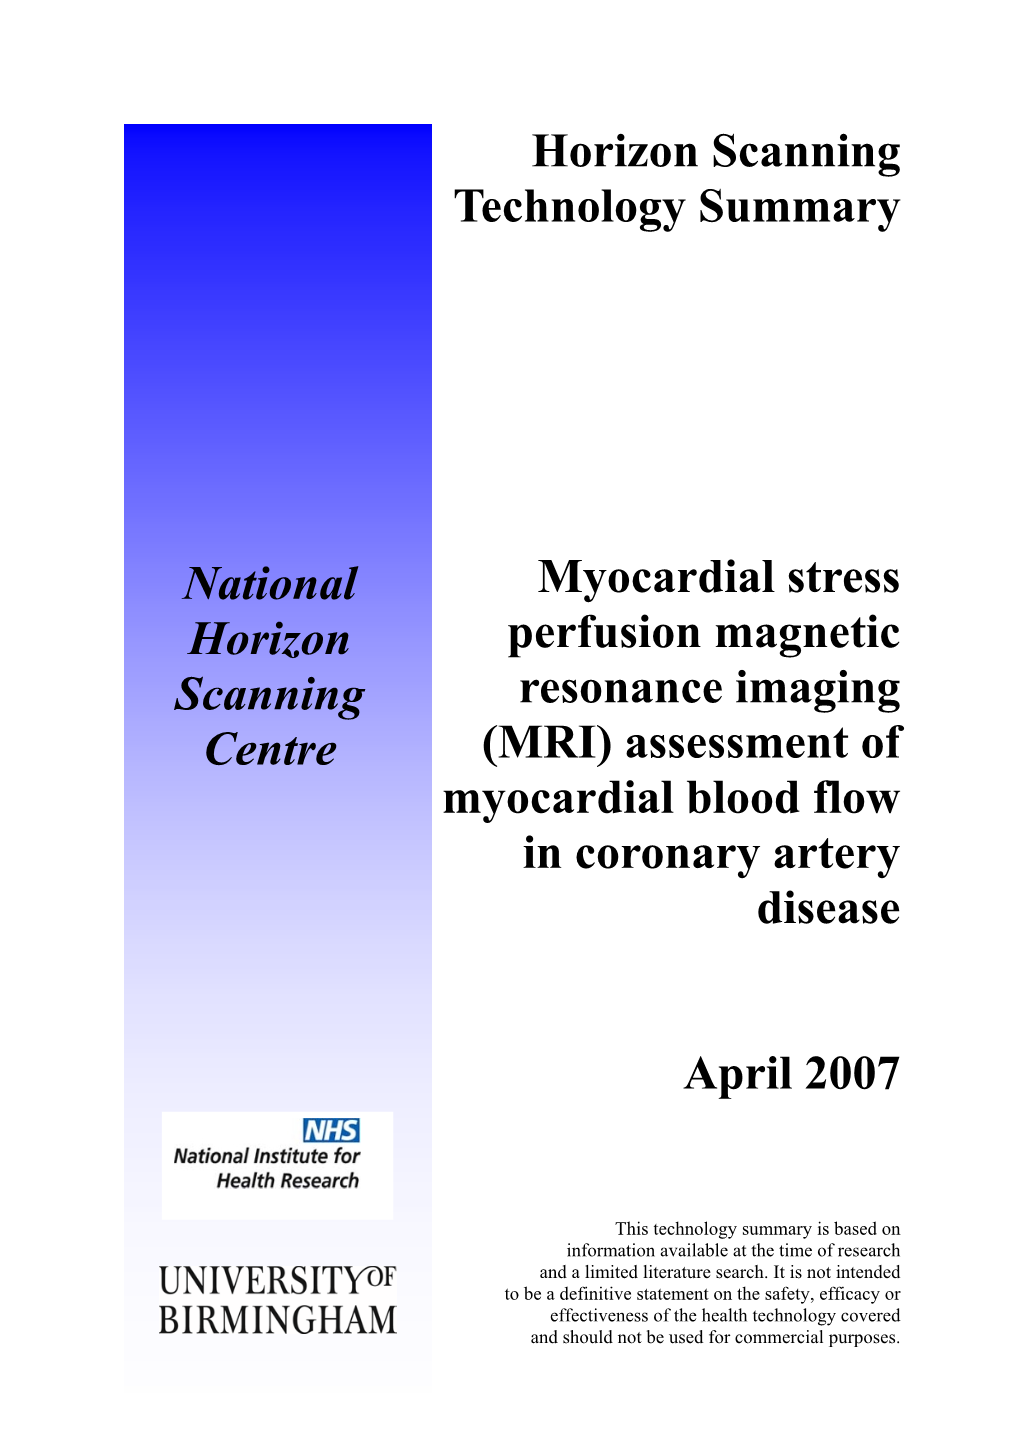 Myocardial Stress Perfusion Magnetic Resonance Imaging (MRI) Assessment of Myocardial Blood Flow in Coronary Artery Disease